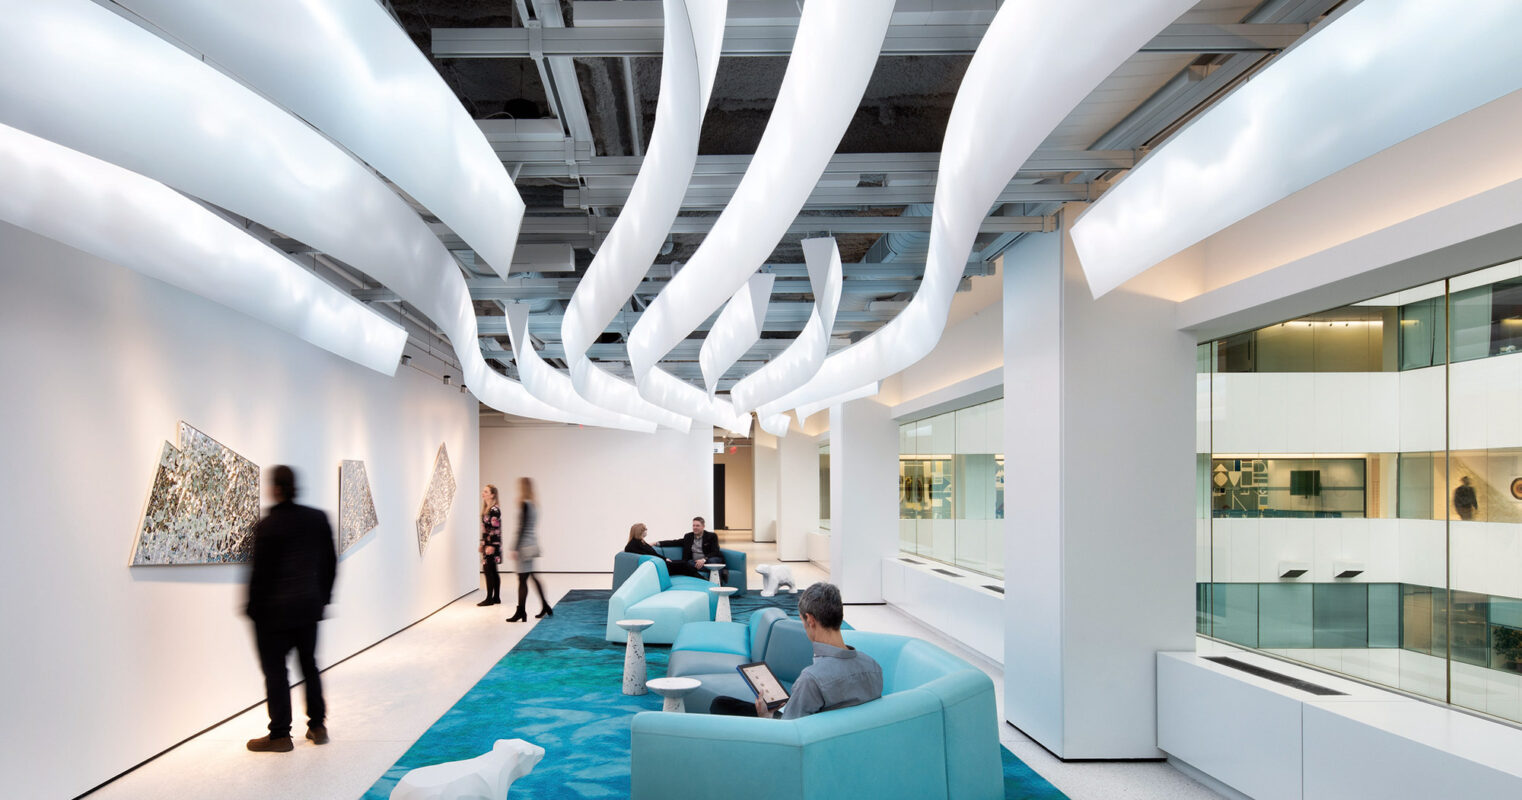 Modern office lobby with futuristic curved lighting fixtures, comfortable seating areas, and abstract art on the walls.